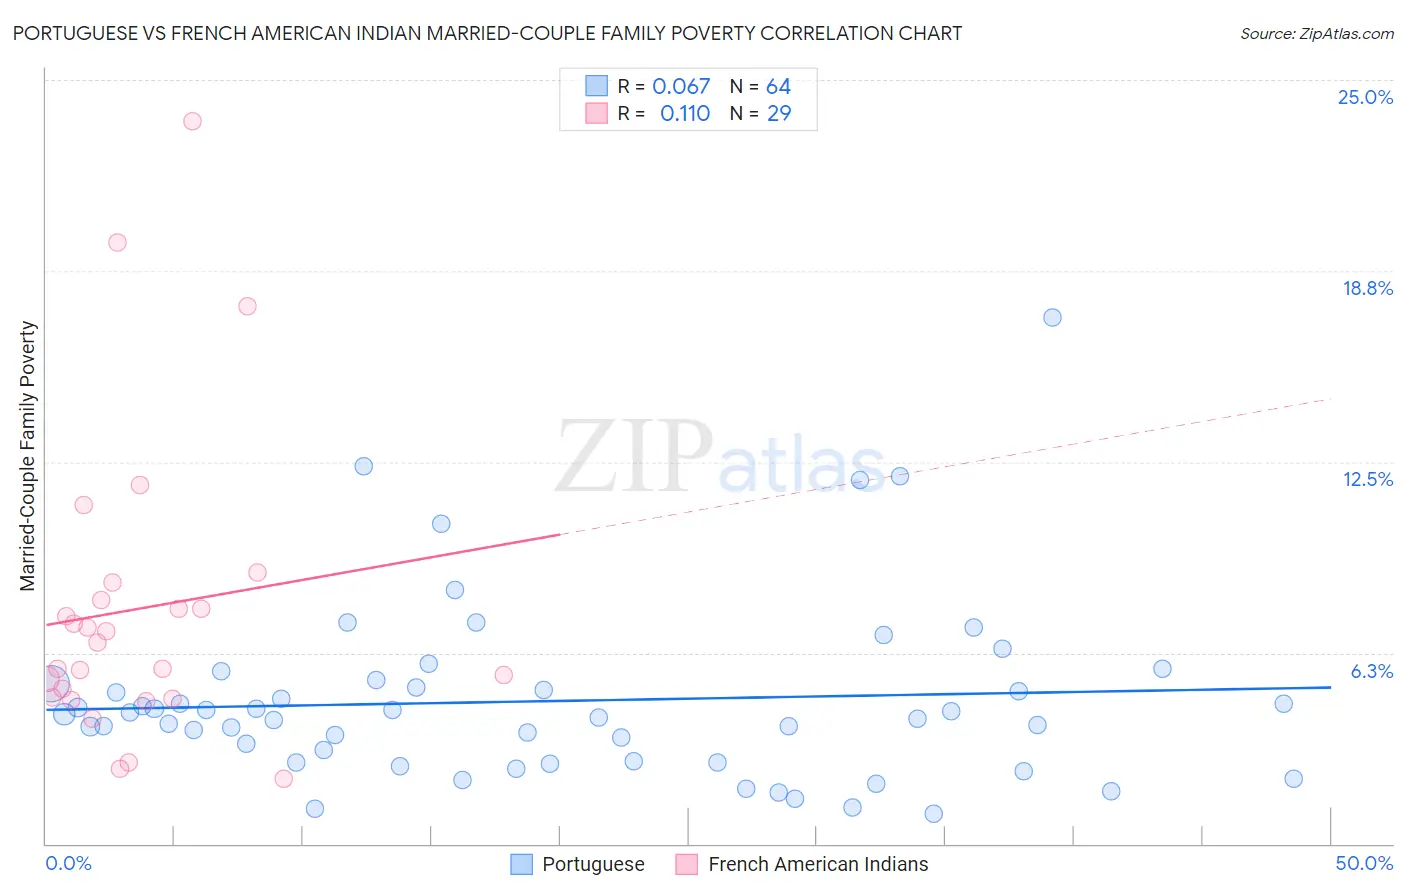 Portuguese vs French American Indian Married-Couple Family Poverty